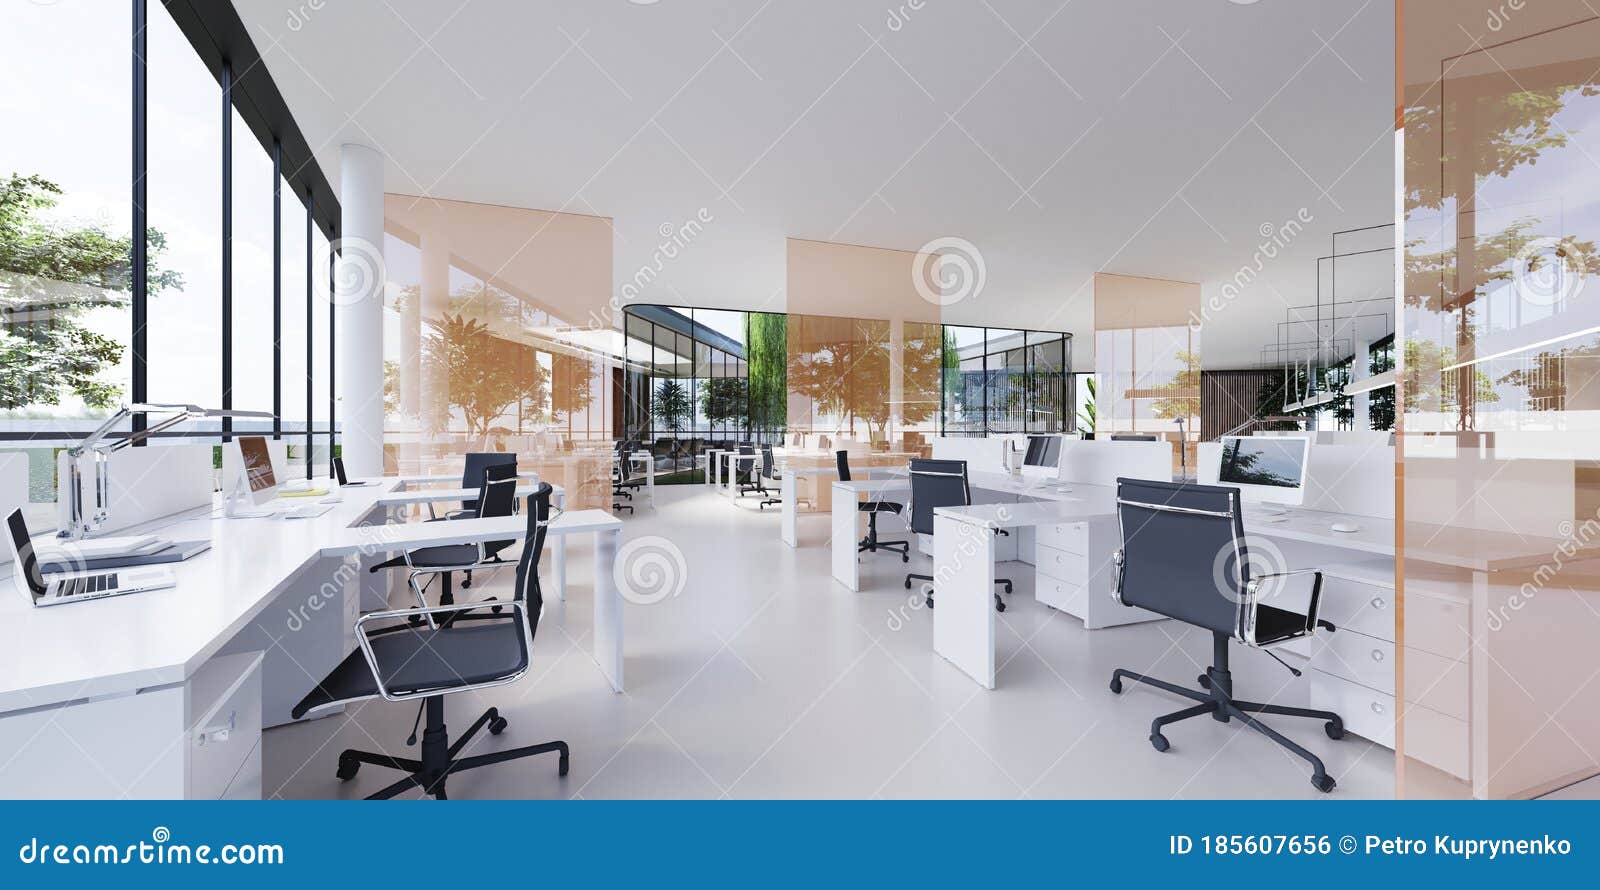 spacious light and lighted office with work desks and glass partitions between